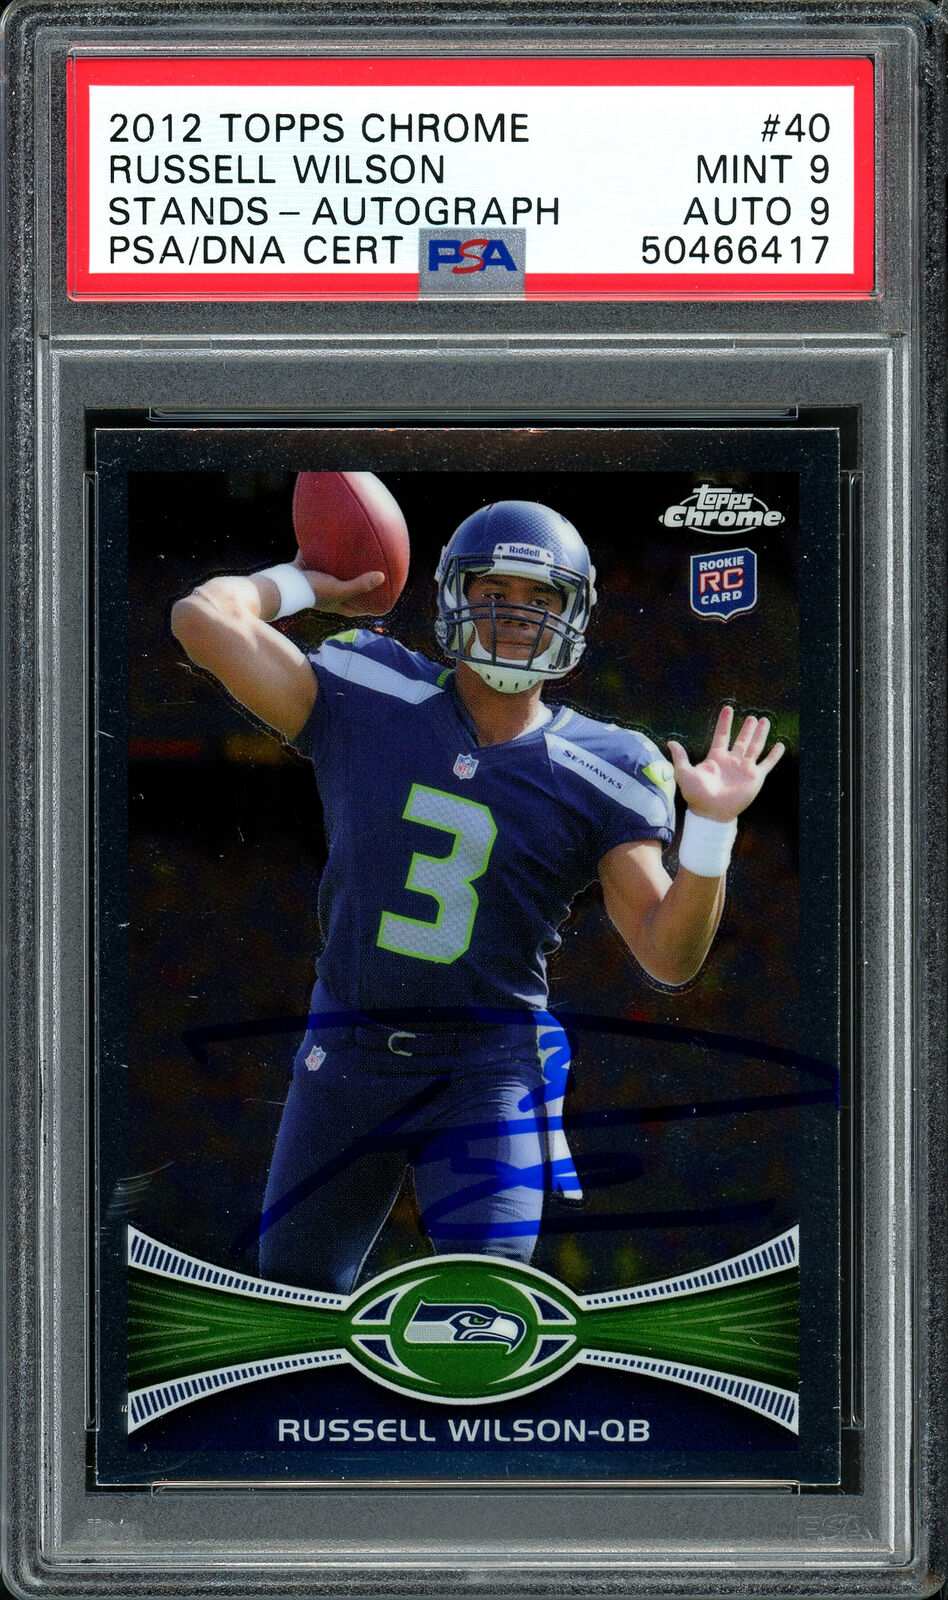 Russell Wilson Autographed Signed 2012 Topps Chrome RC PSA 9 Auto 9 50466417 Image 2